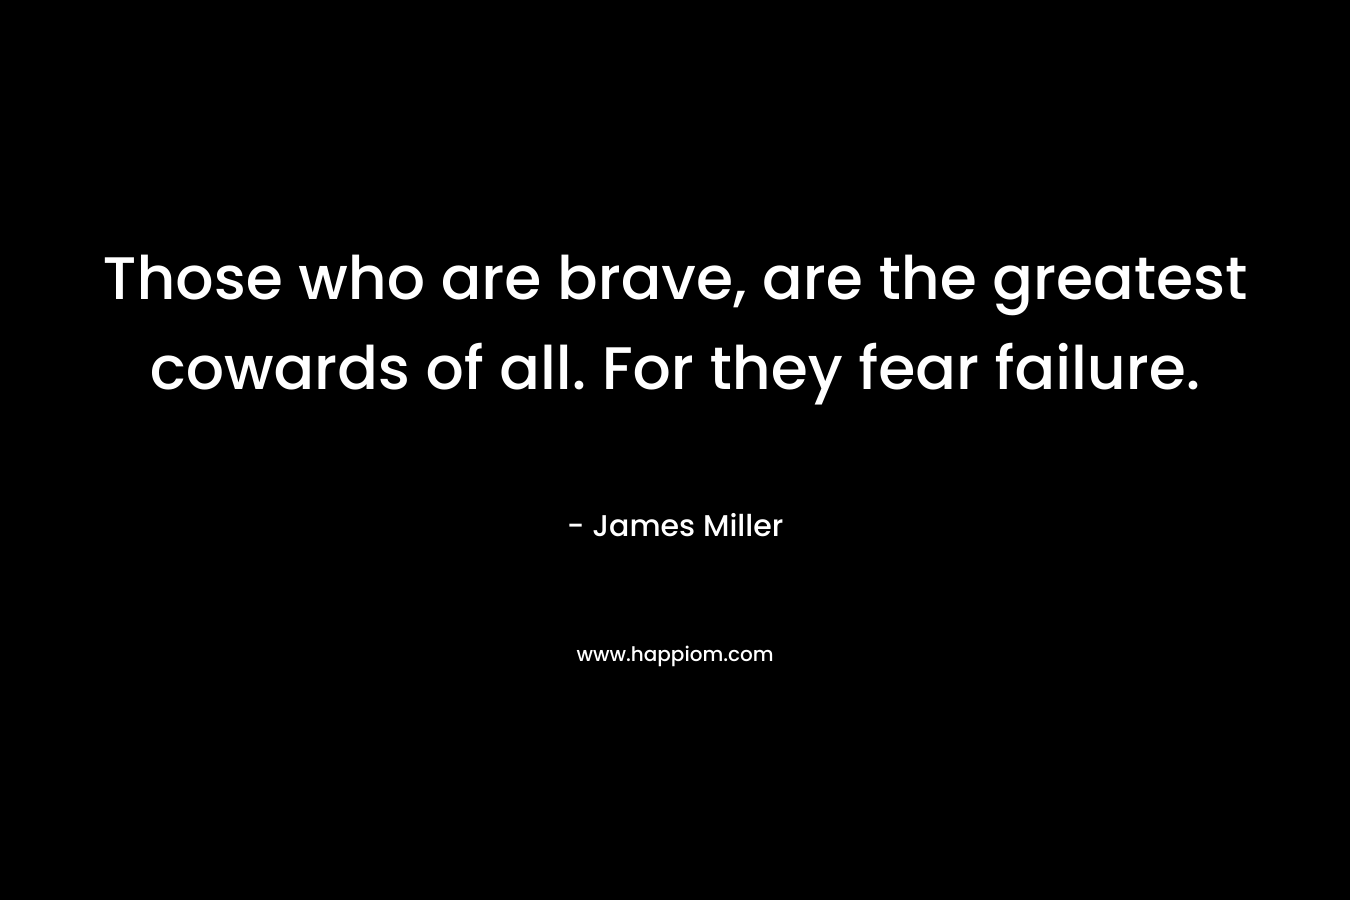 Those who are brave, are the greatest cowards of all. For they fear failure.